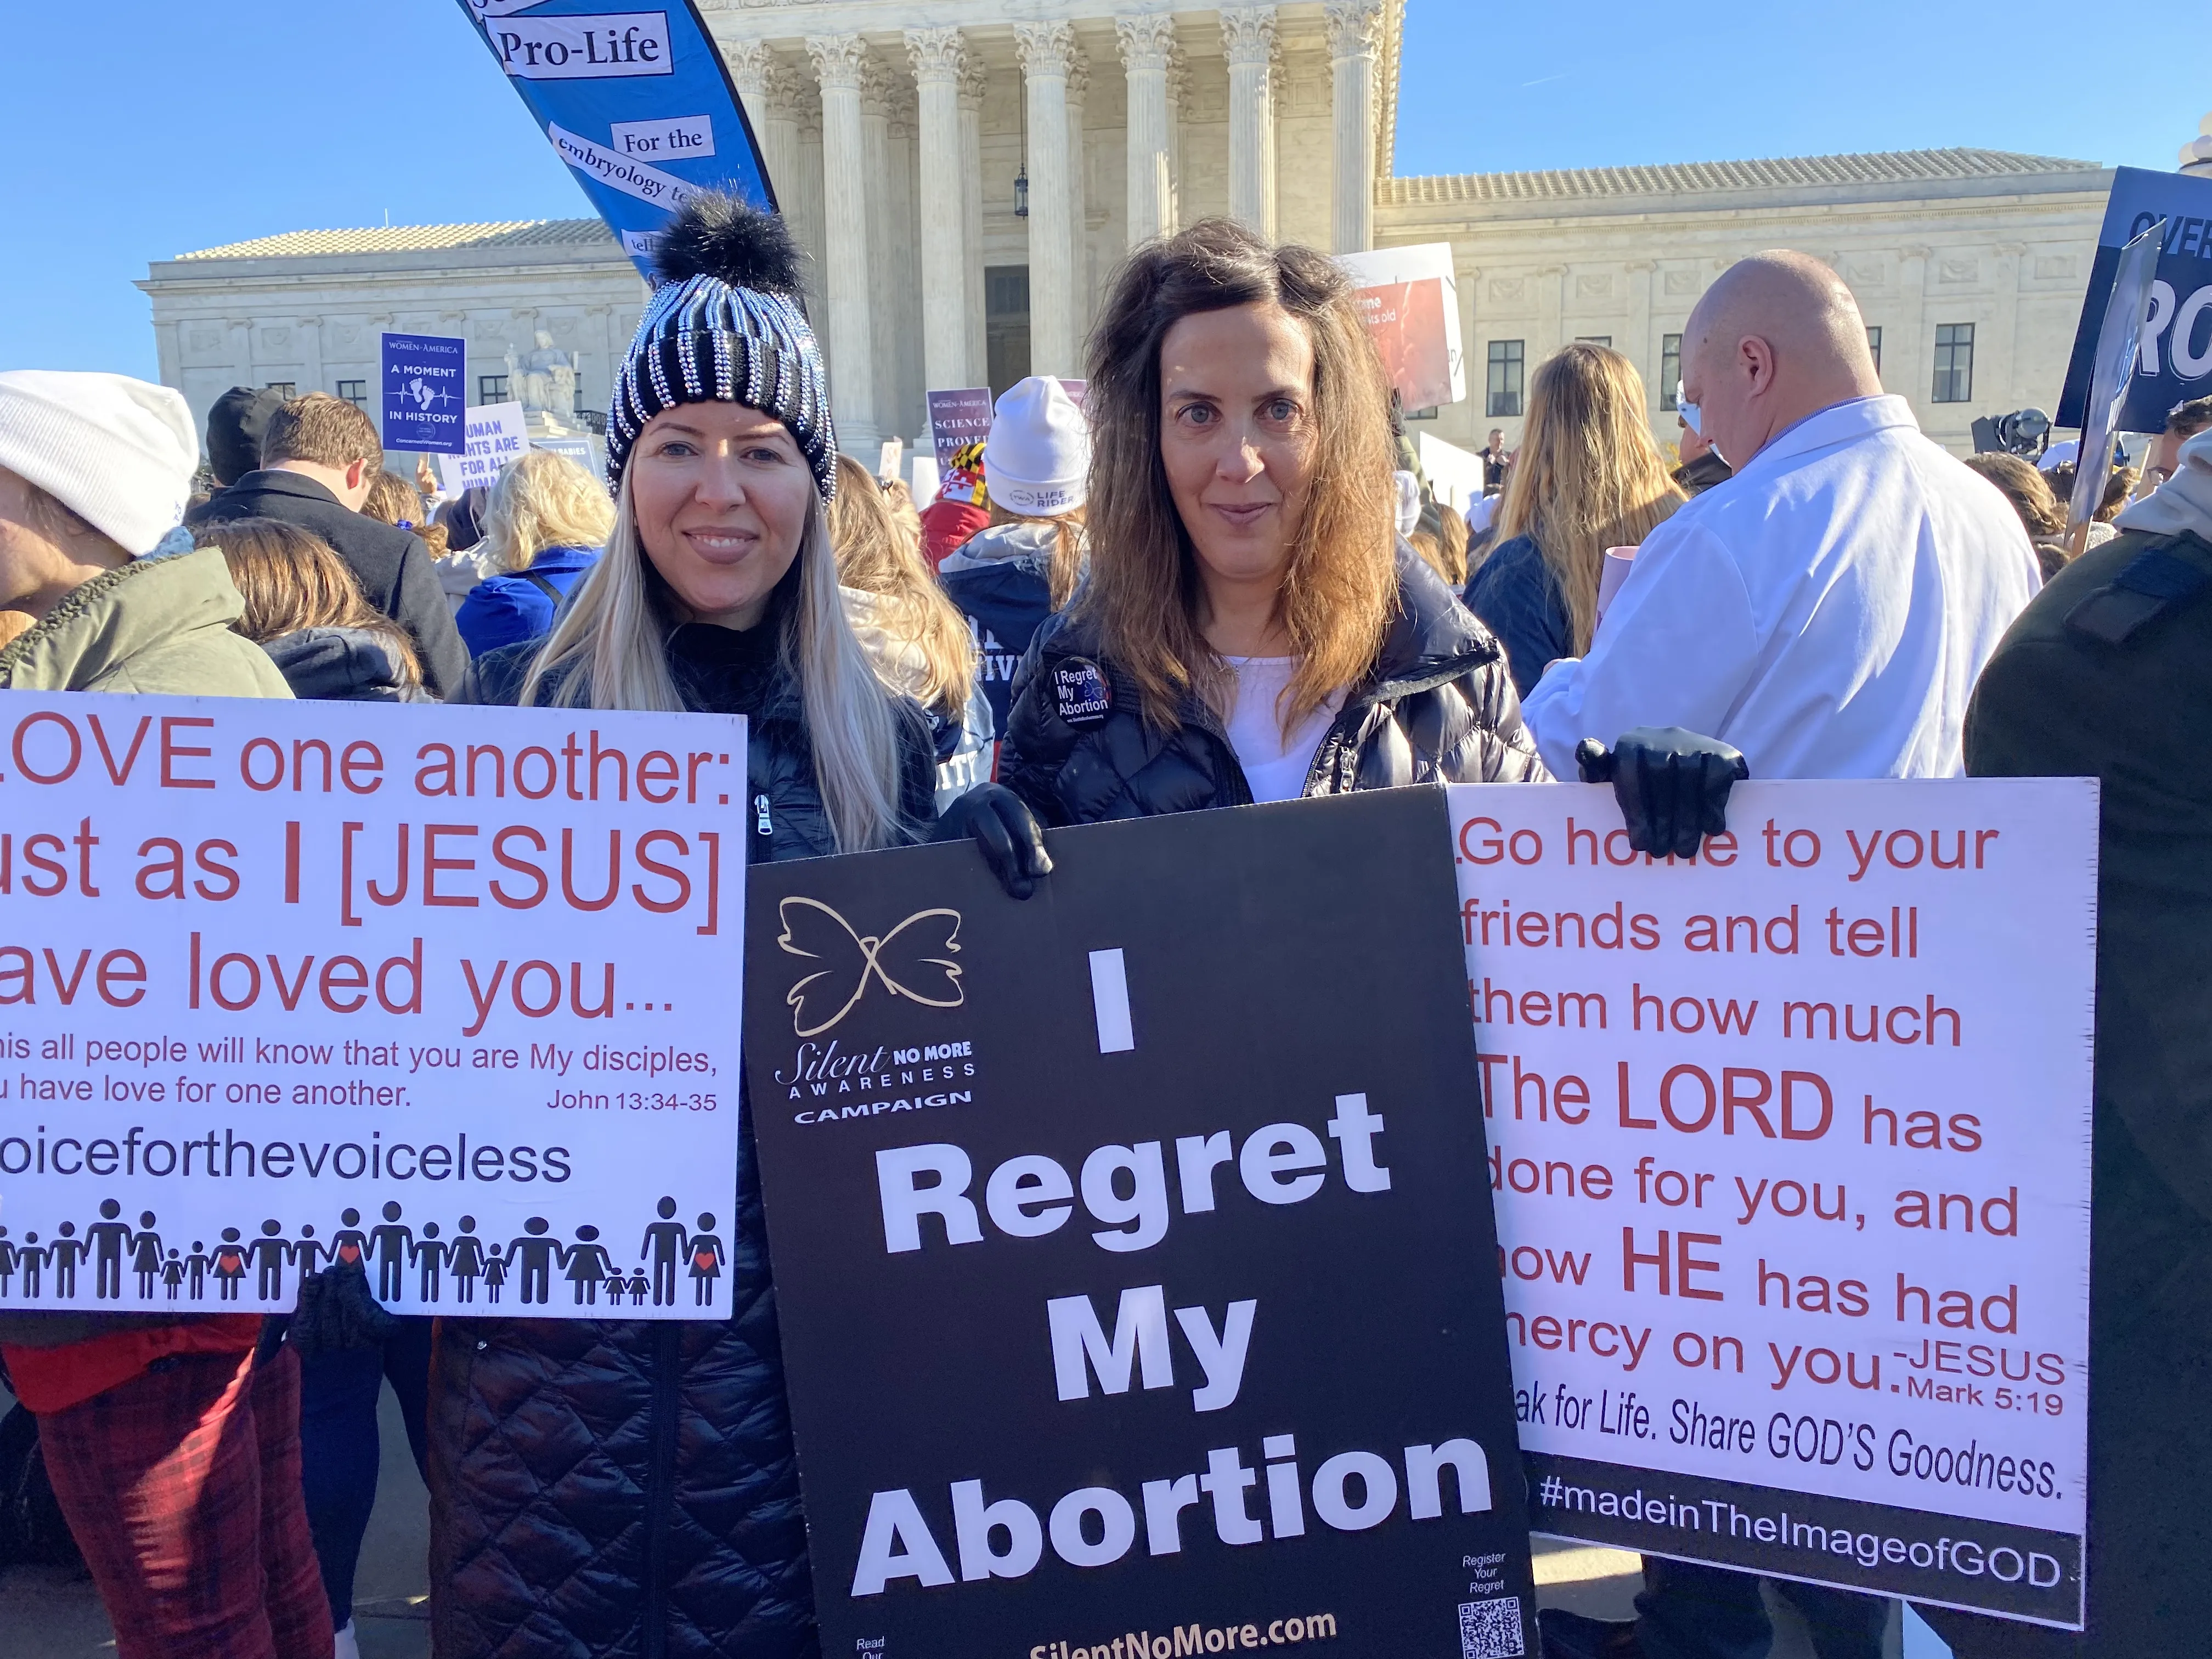 Anna Del Duca (right) and her daughter, Frances, traveled from Pittsburgh to attend a pro-life rally outside the U.S. Supreme Court on Dec. 1, 2021, in conjunction with oral arguments for the Dobbs v. Jackson Women's Health Organization abortion case. Katie Yoder/CNA